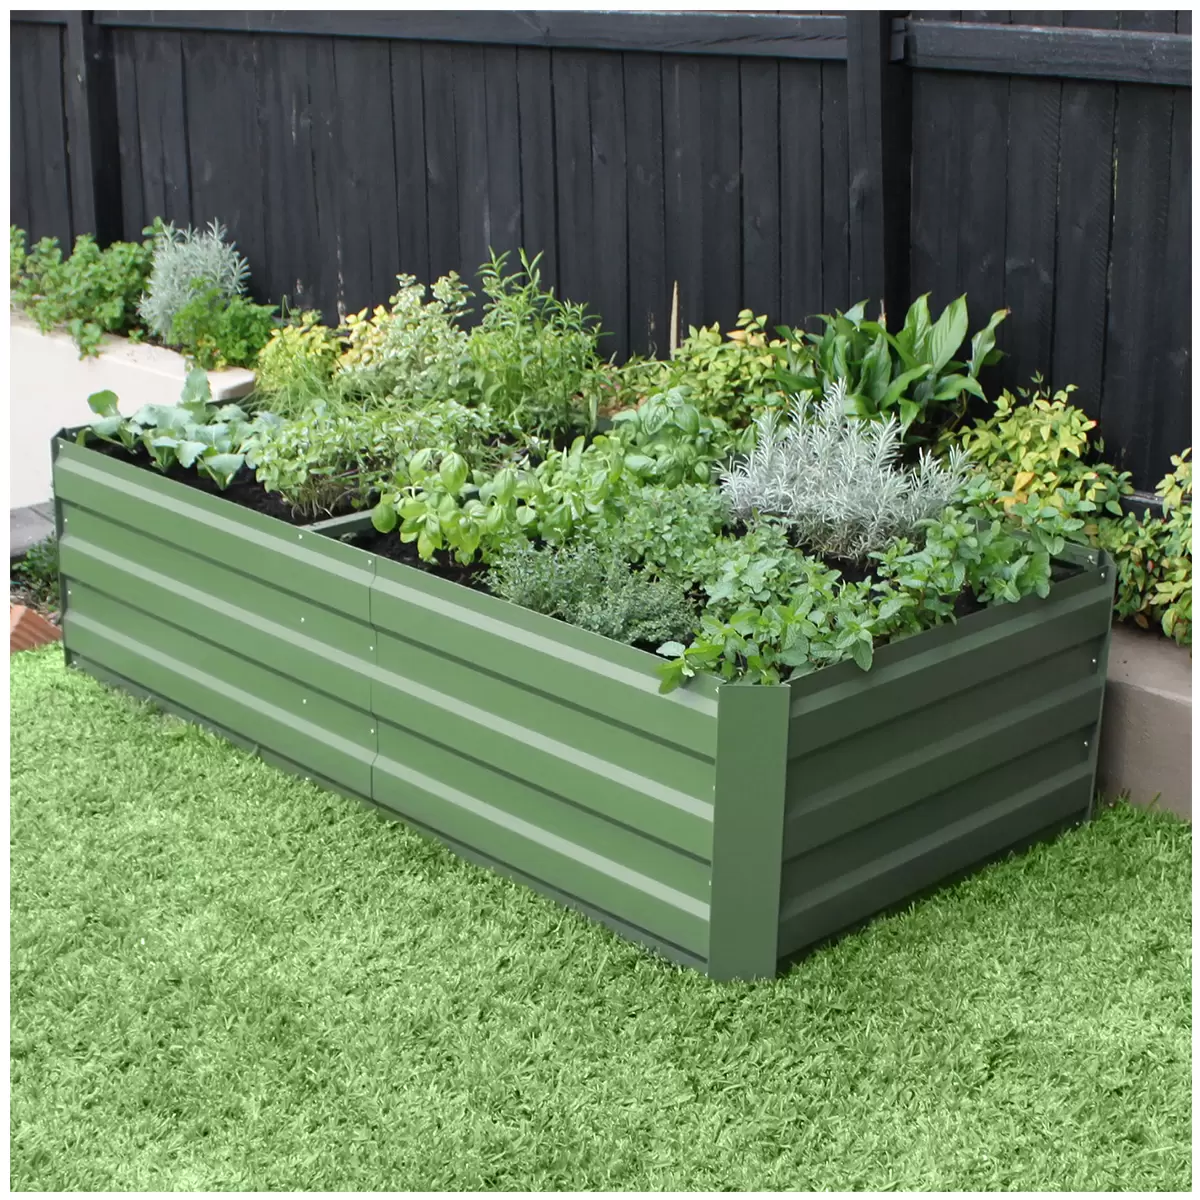 Greenlife Large Garden Bed 180 x 90 x 45cm 